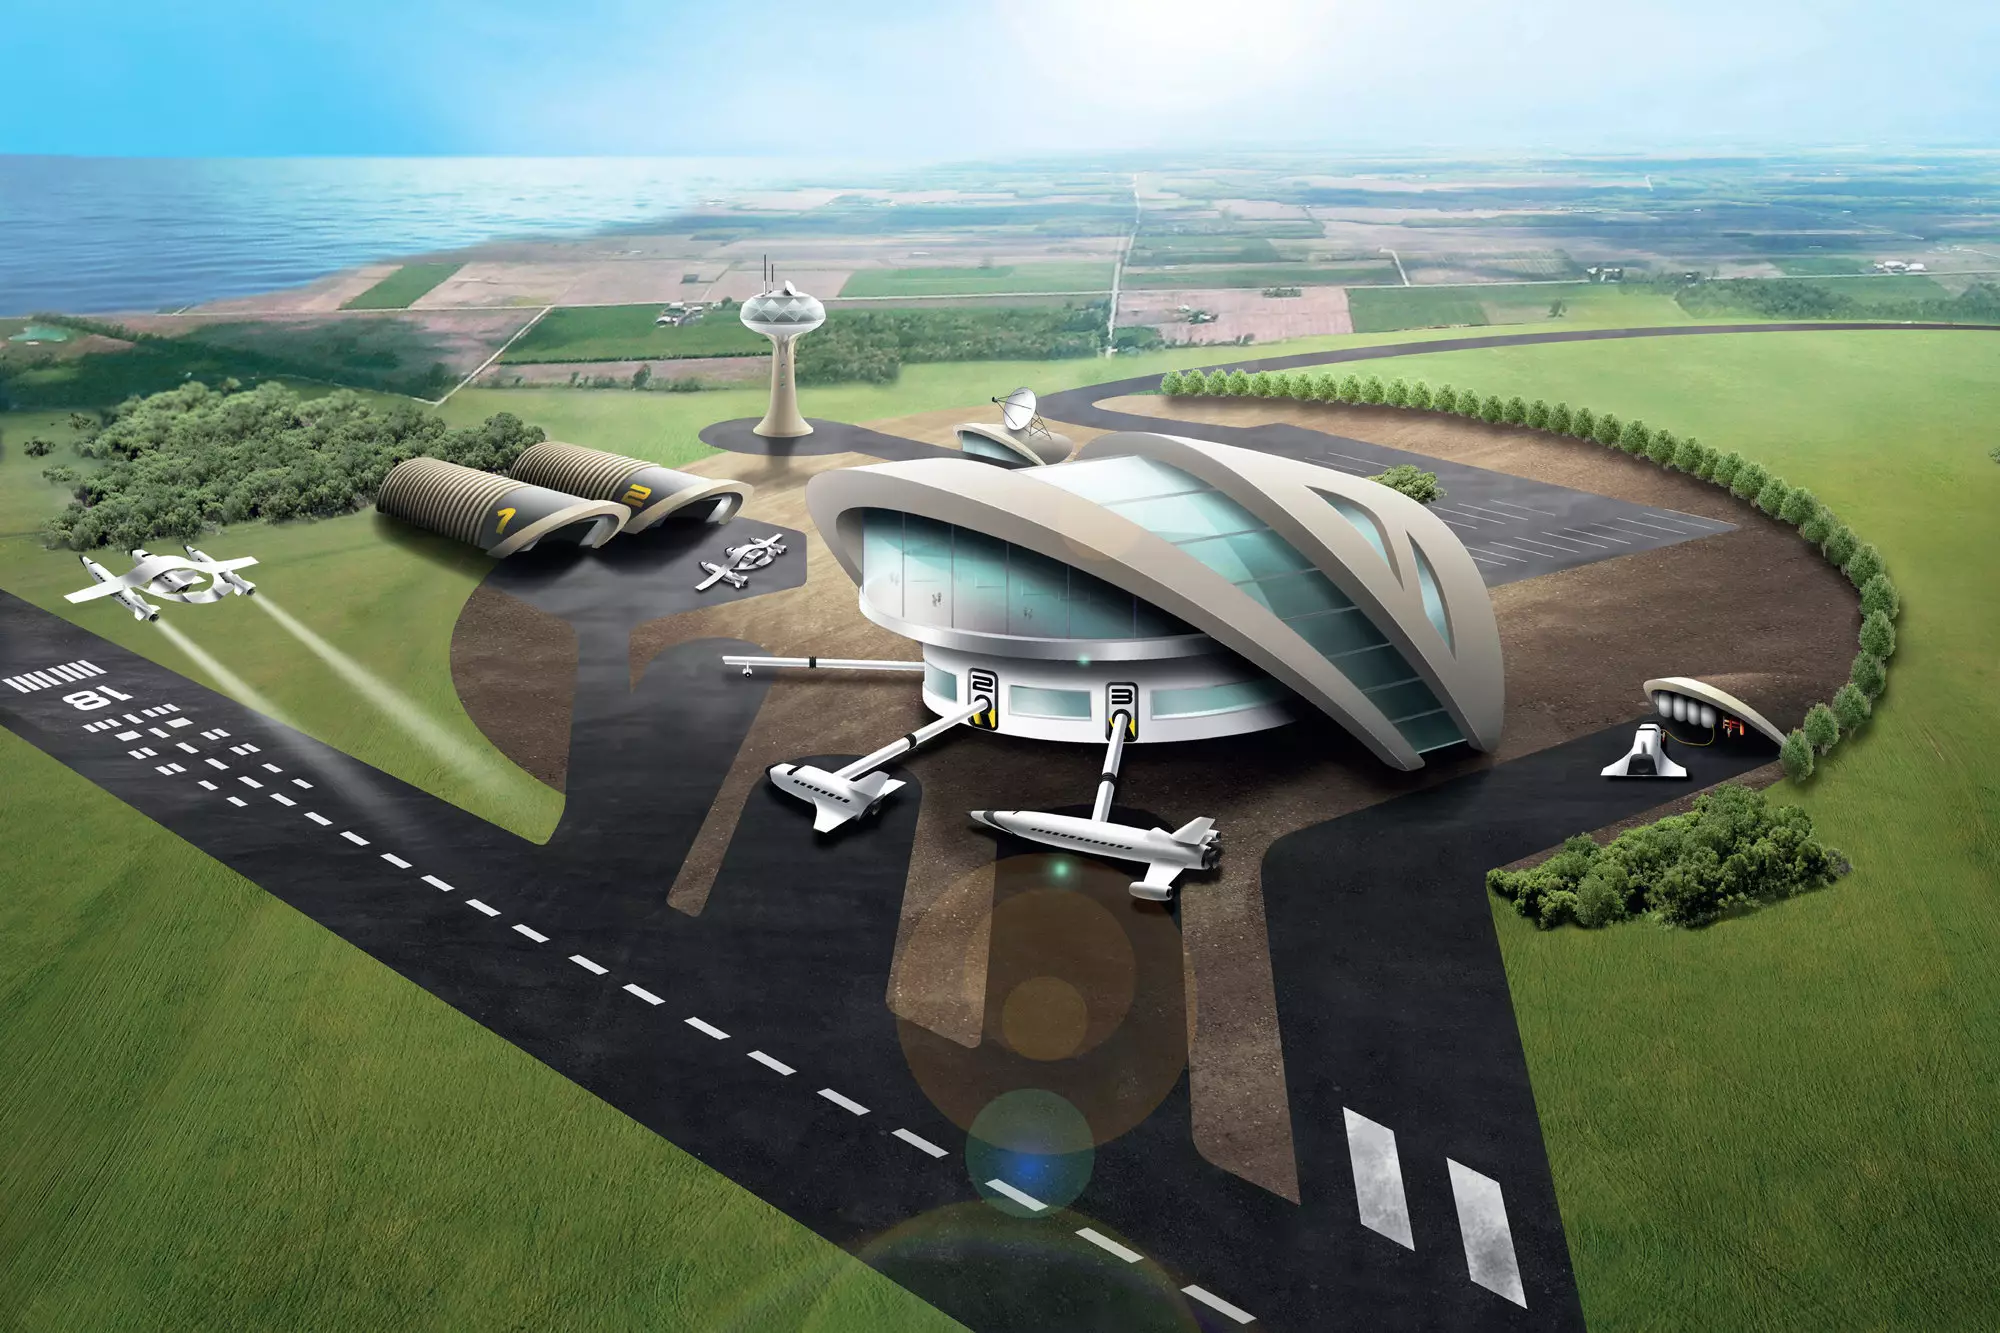 An artist's impression of the proposed spaceport.